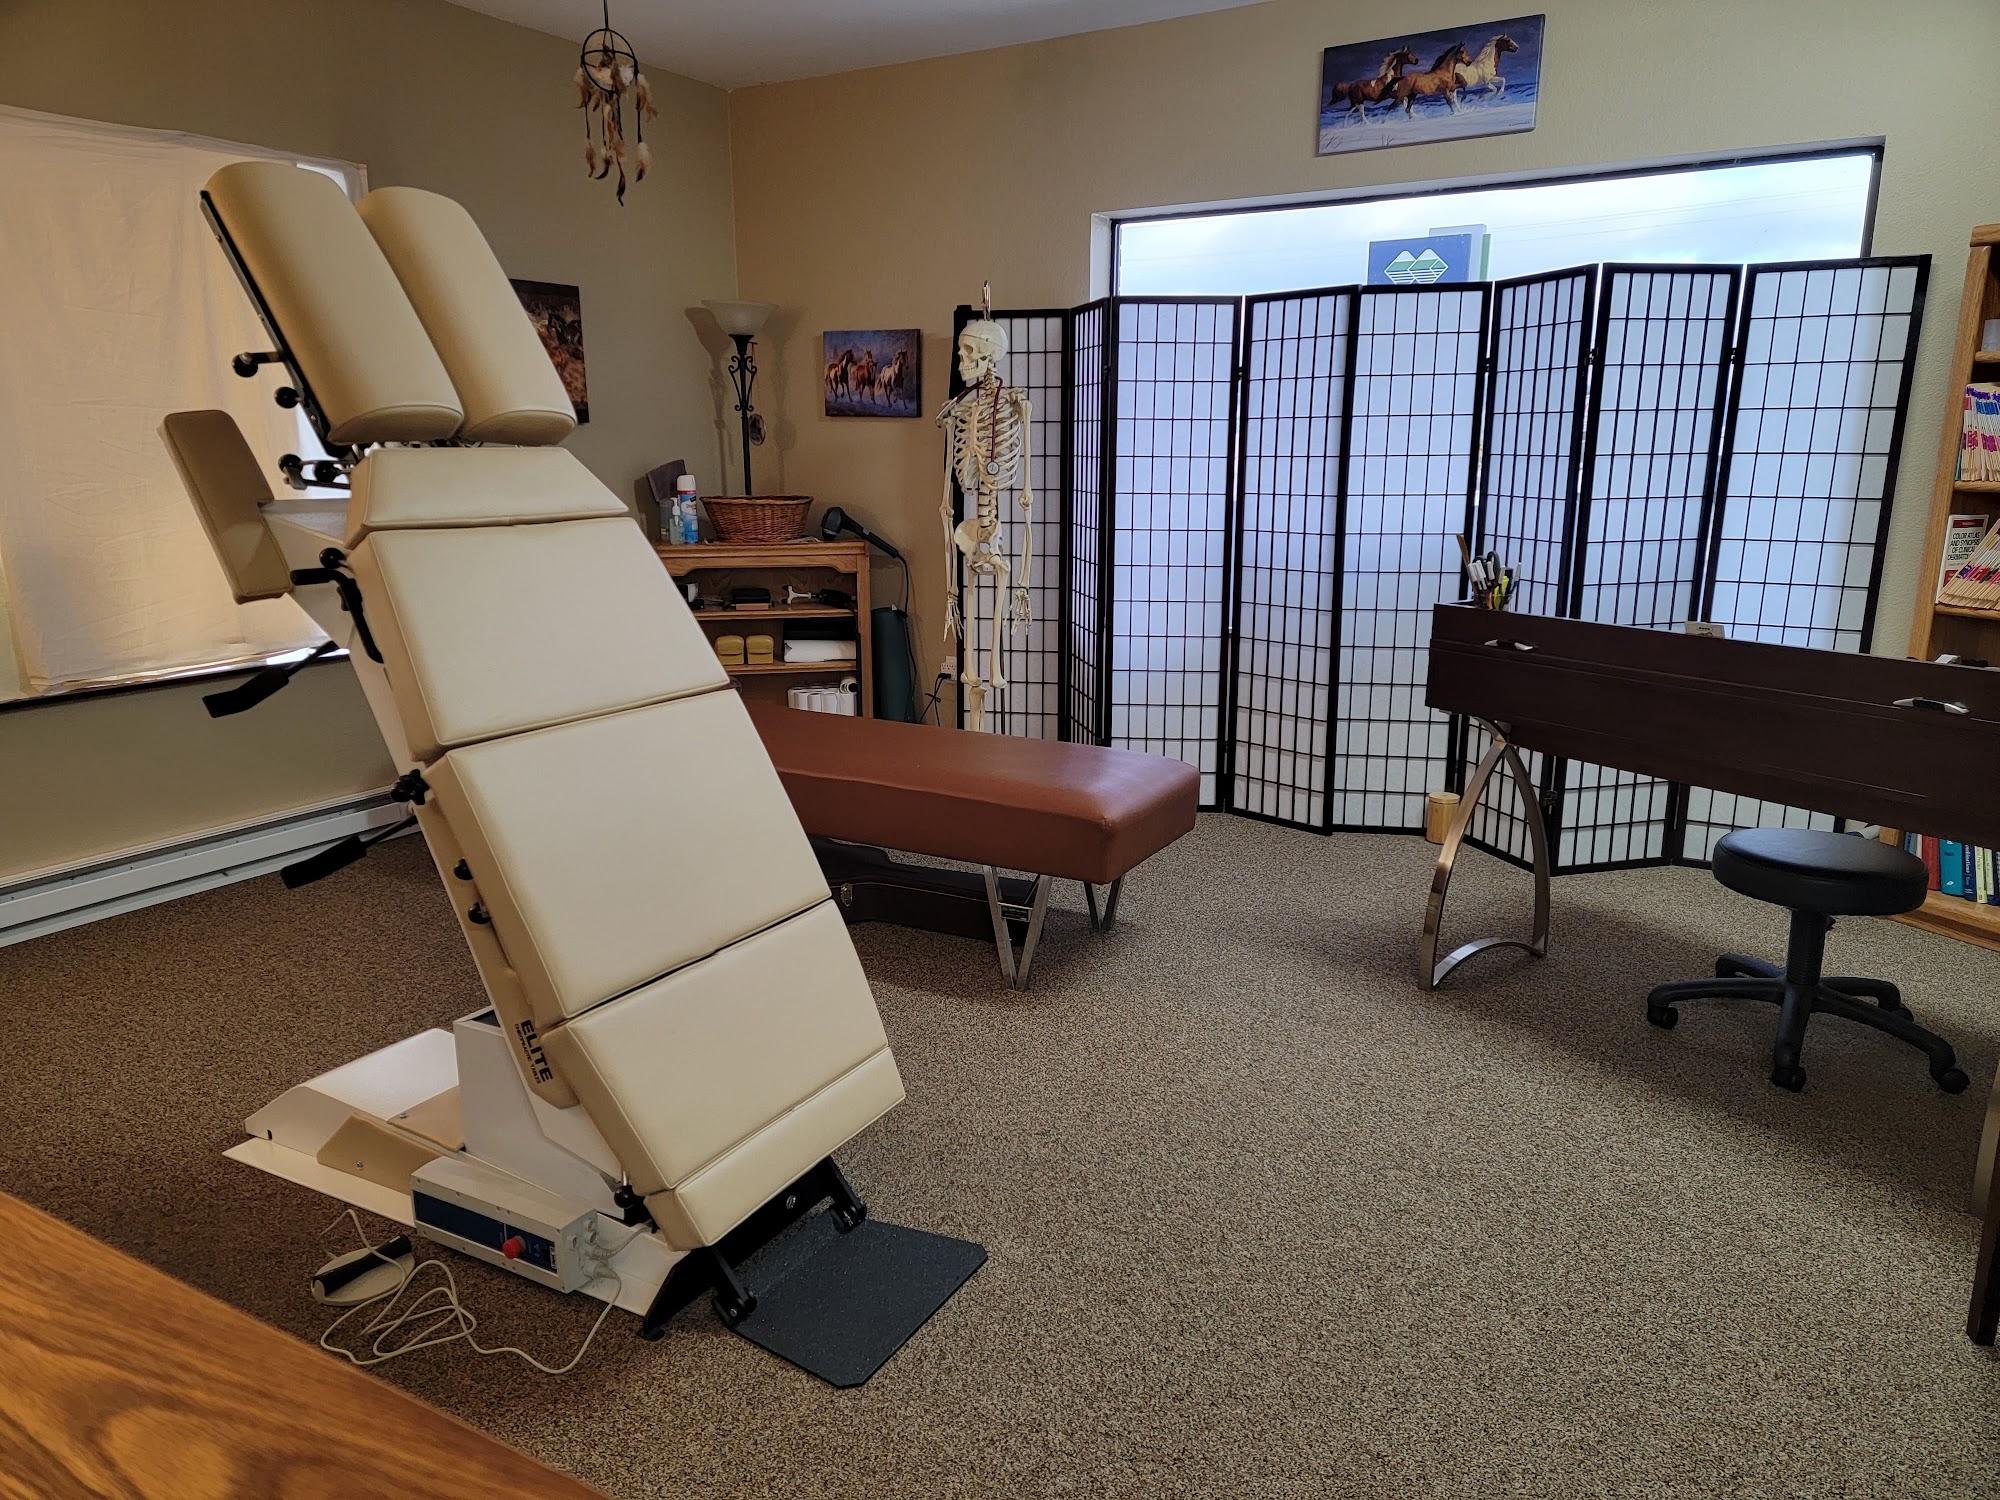 Newport Chiropractic and Acupuncture 405 W Walnut St Suite 1, Newport Washington 99156